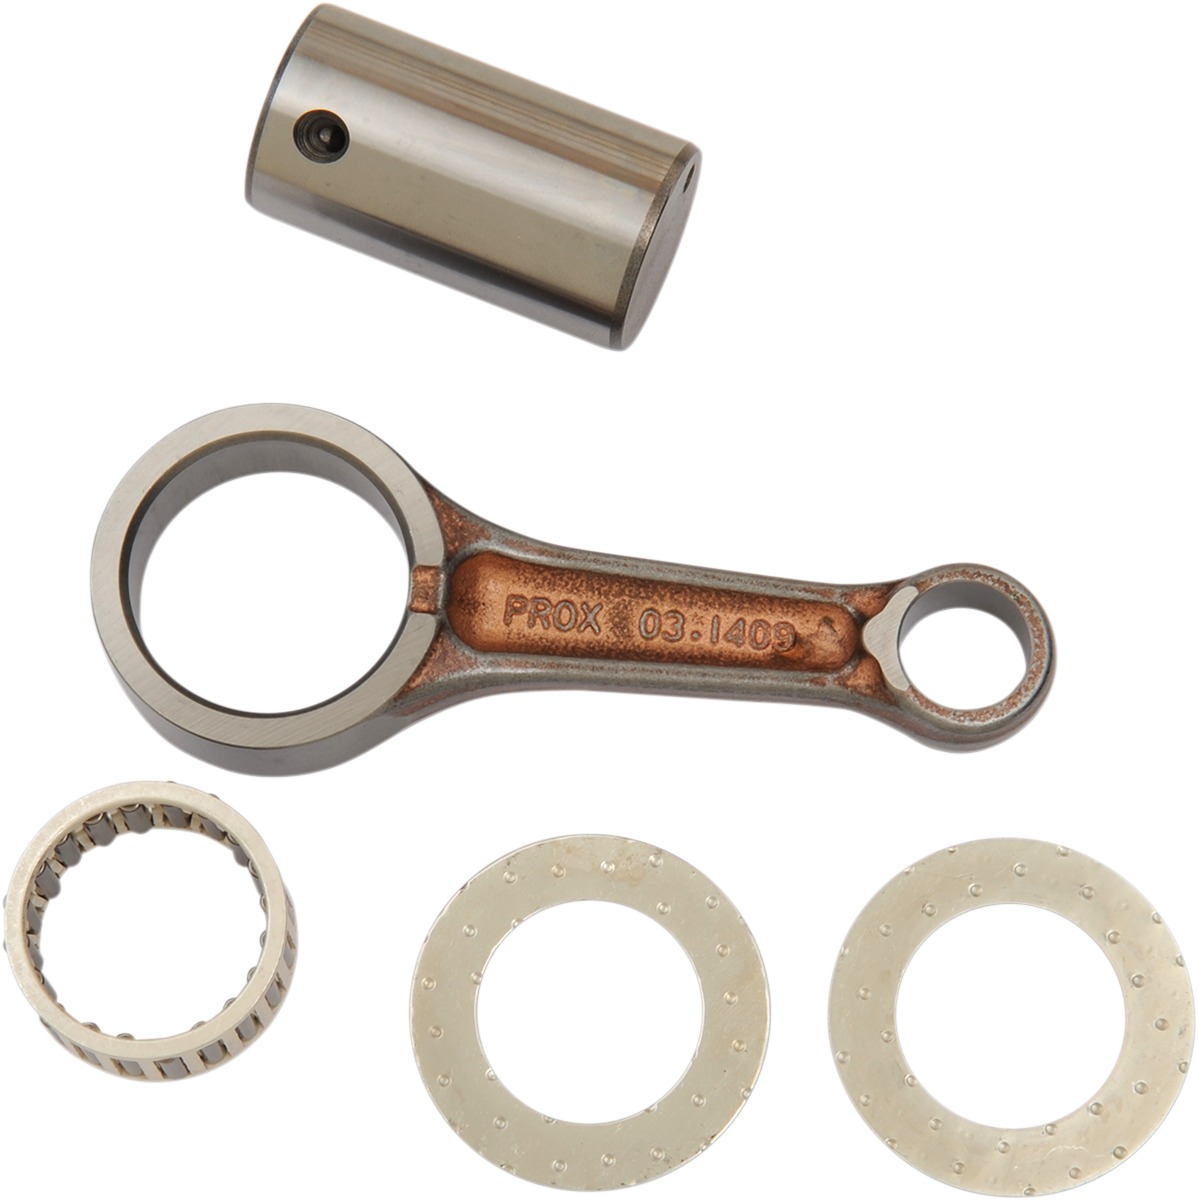 Connecting Rod Kit - For 09-14 Honda CRF450R - Click Image to Close